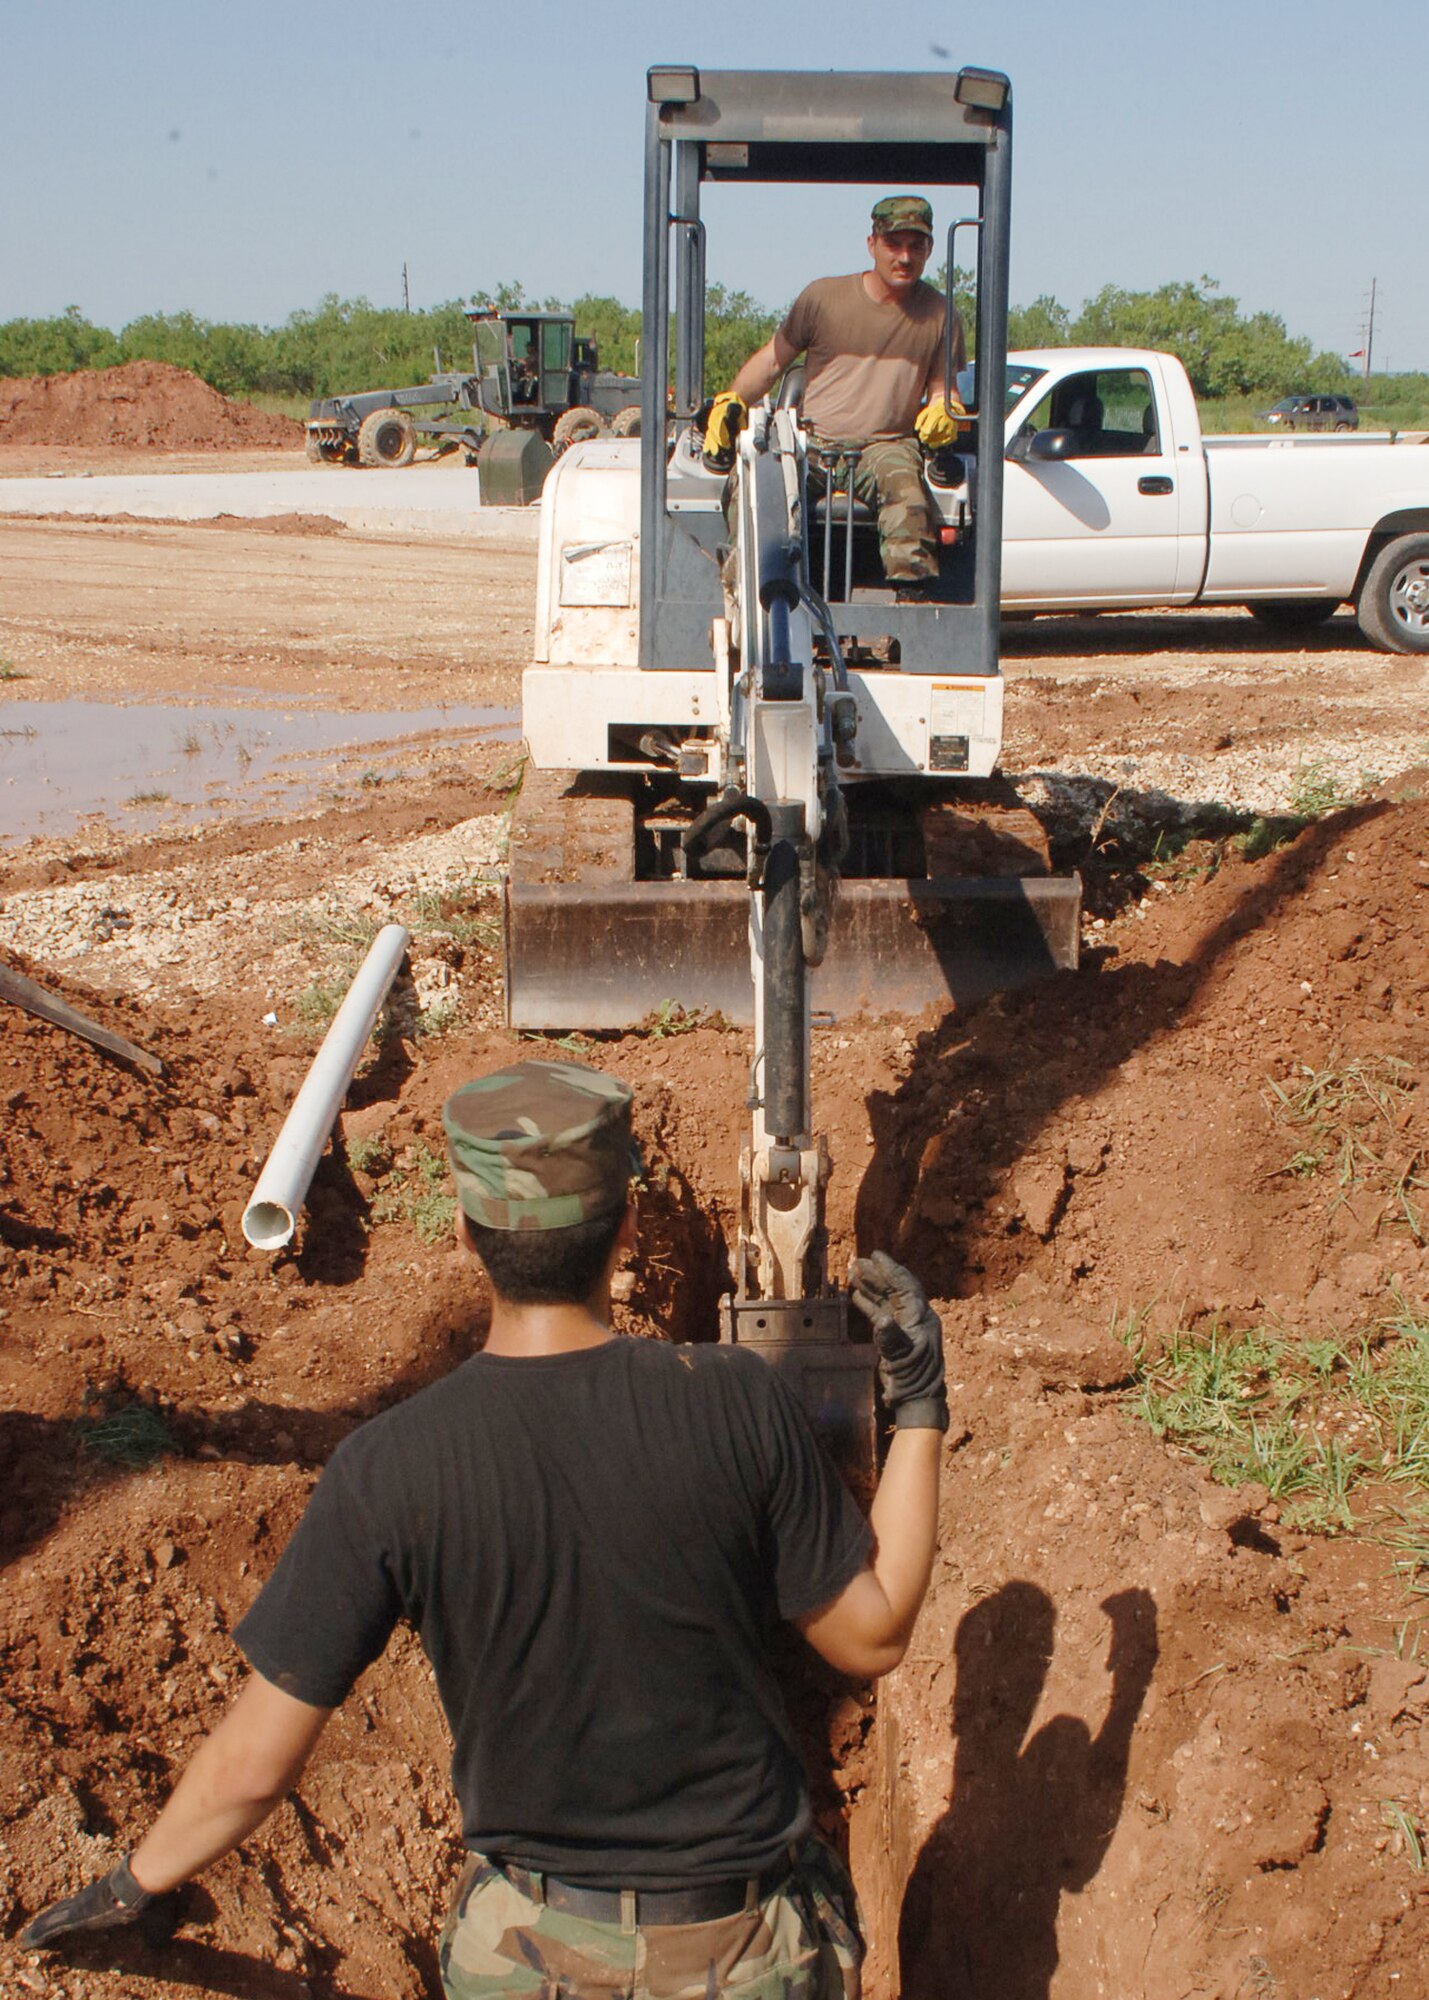 DYESS AIR FORCE BASE, Texas -- Airman Victor Aldana indicates how far forward Tech. Sgt. Matthew Cross, 7th Civil Engineer Squadron, can drive a Bobcat tractor June 14. They are digging a hole for a water line to be put in near the cantonment area for Operational Readiness Exercises. (U.S Air Force photo by Airman 1st Class Felicia Juenke)